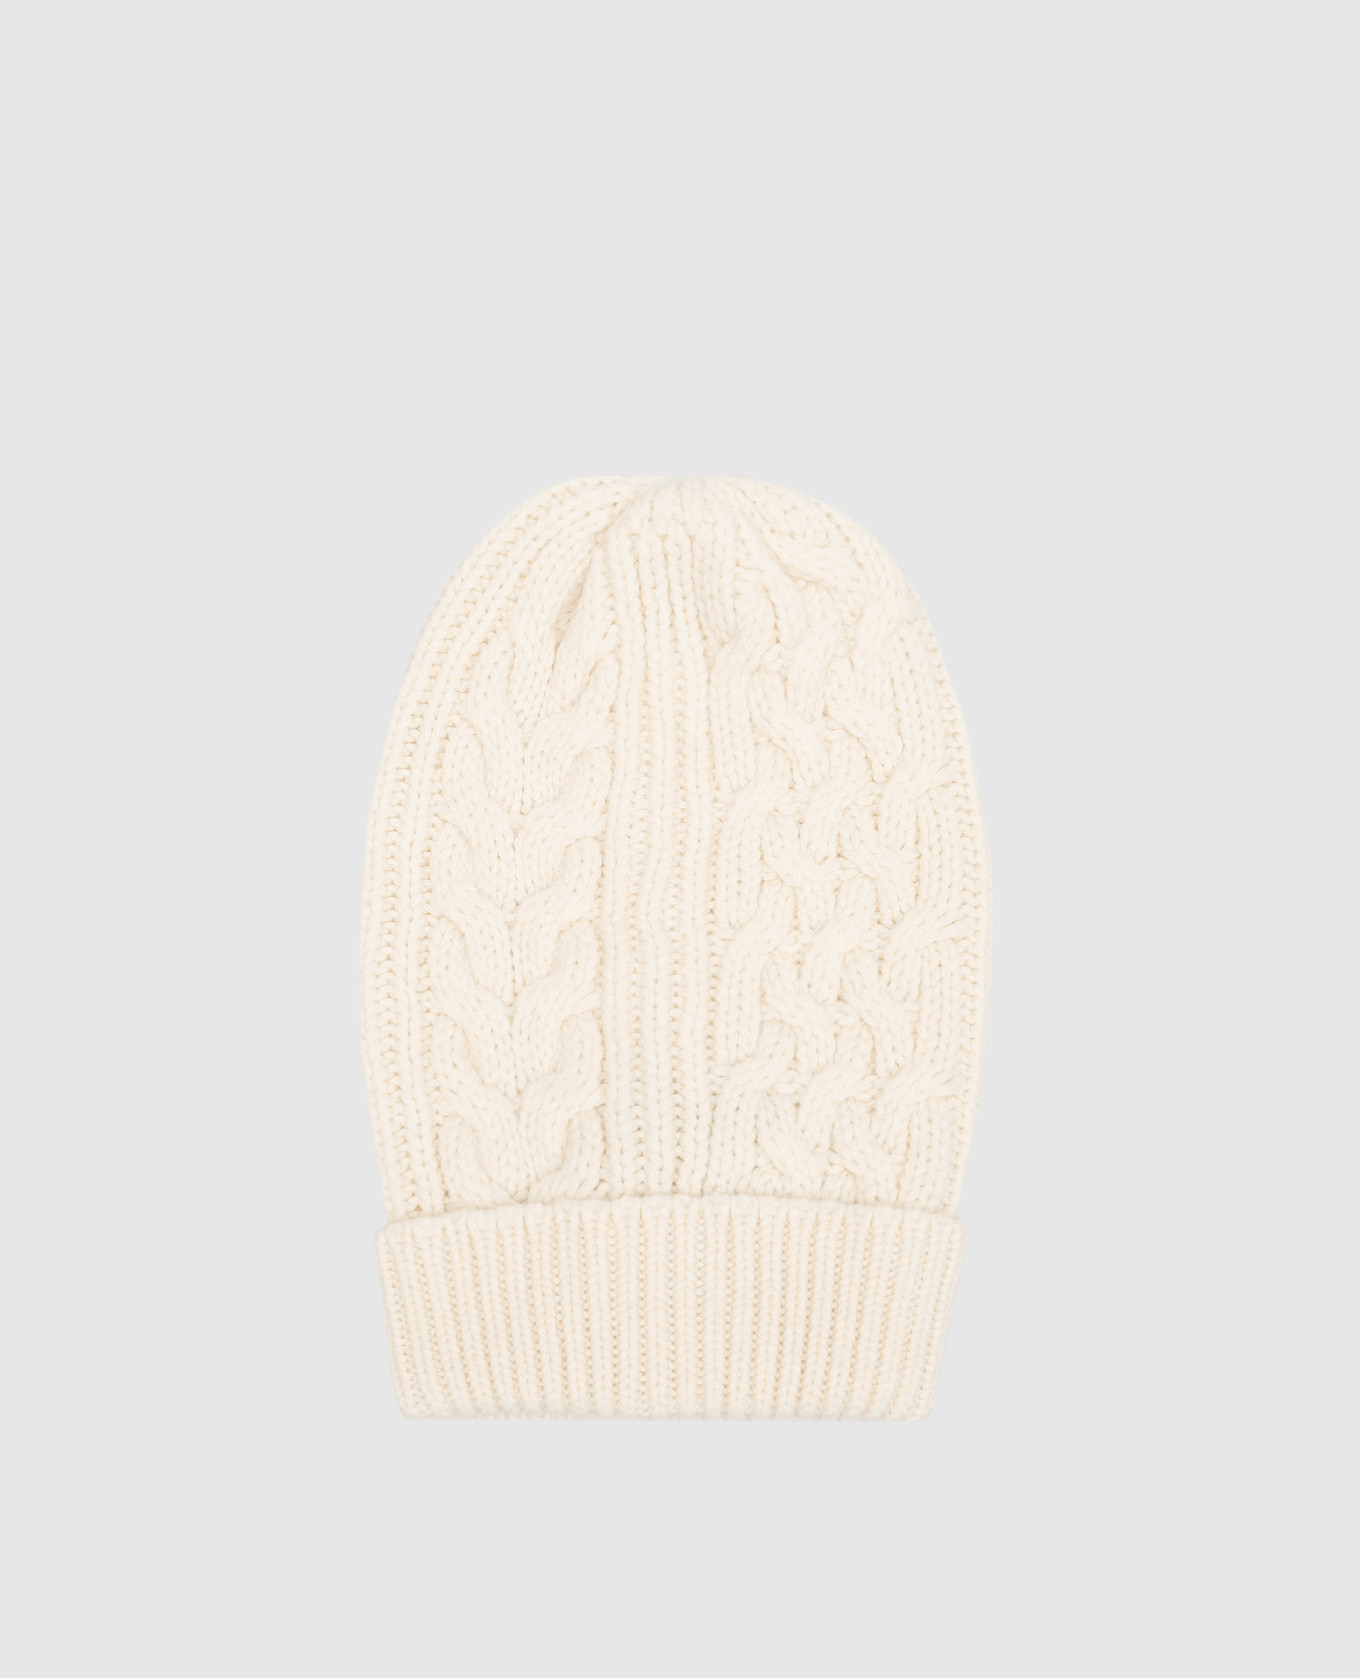 White hat made of cashmere in a textured pattern